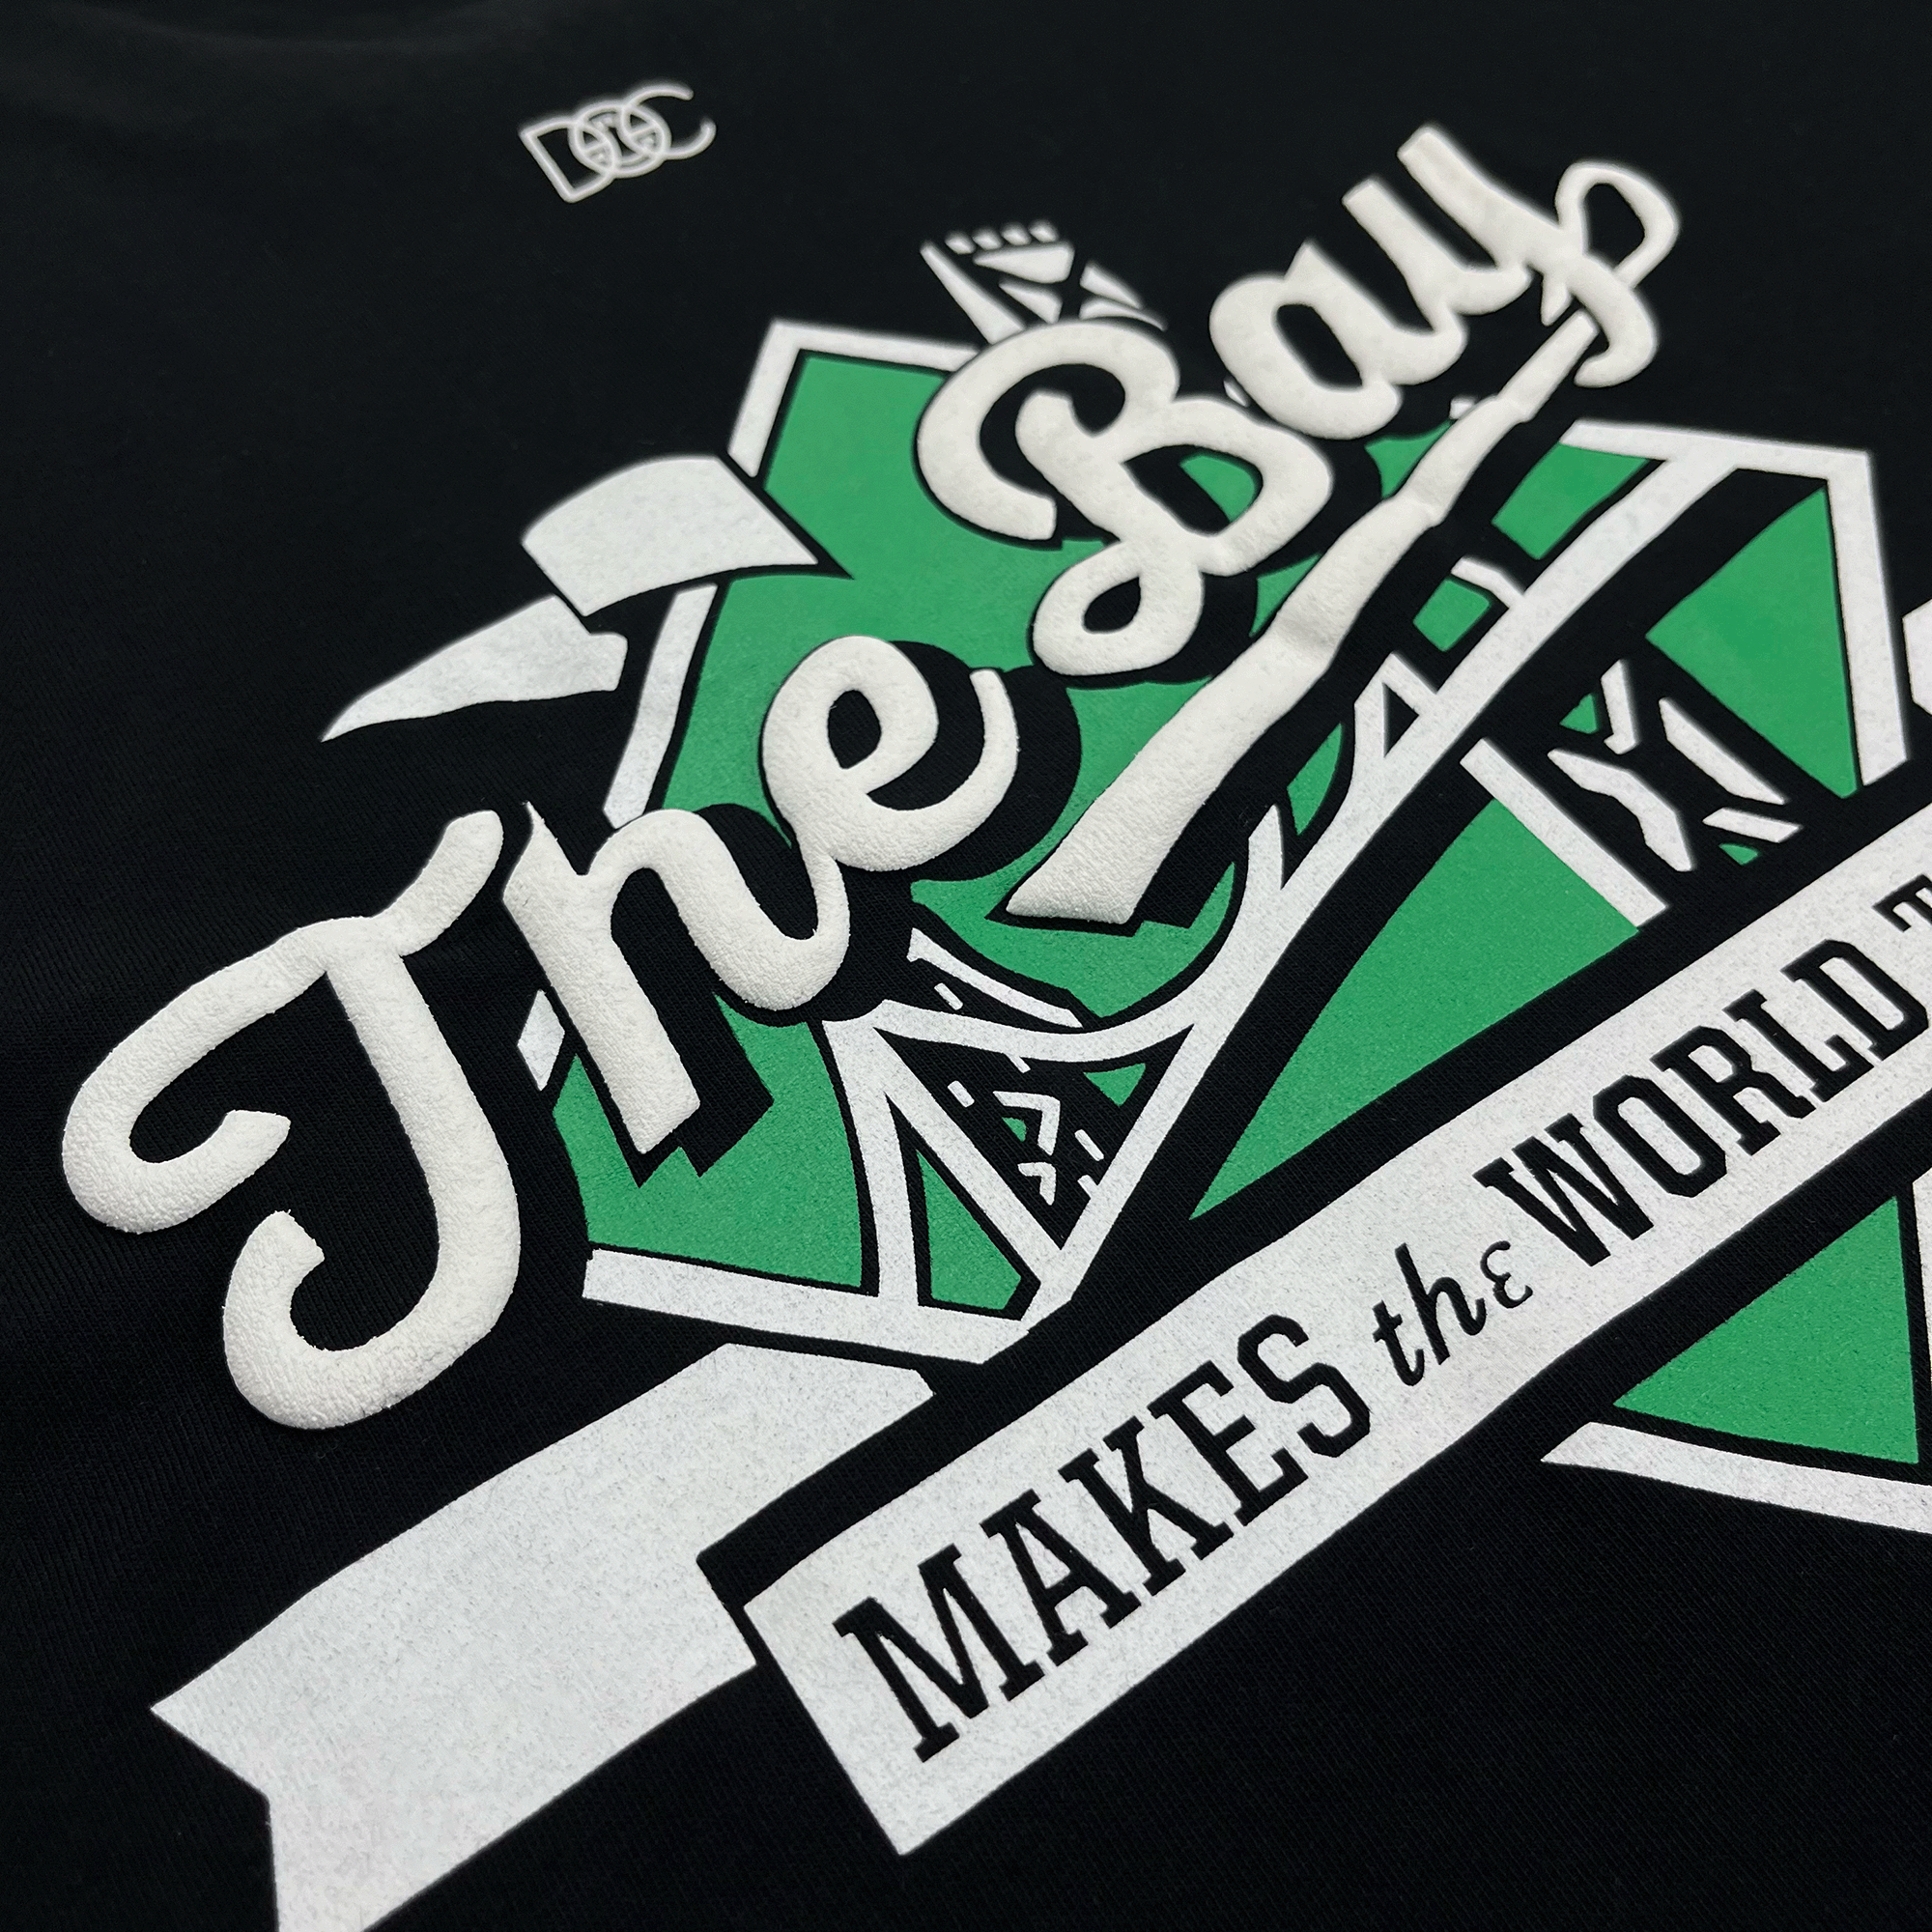 Detailed close-up of The Bay Makes The World Takes green and white logo graphic on a black t-shirt.